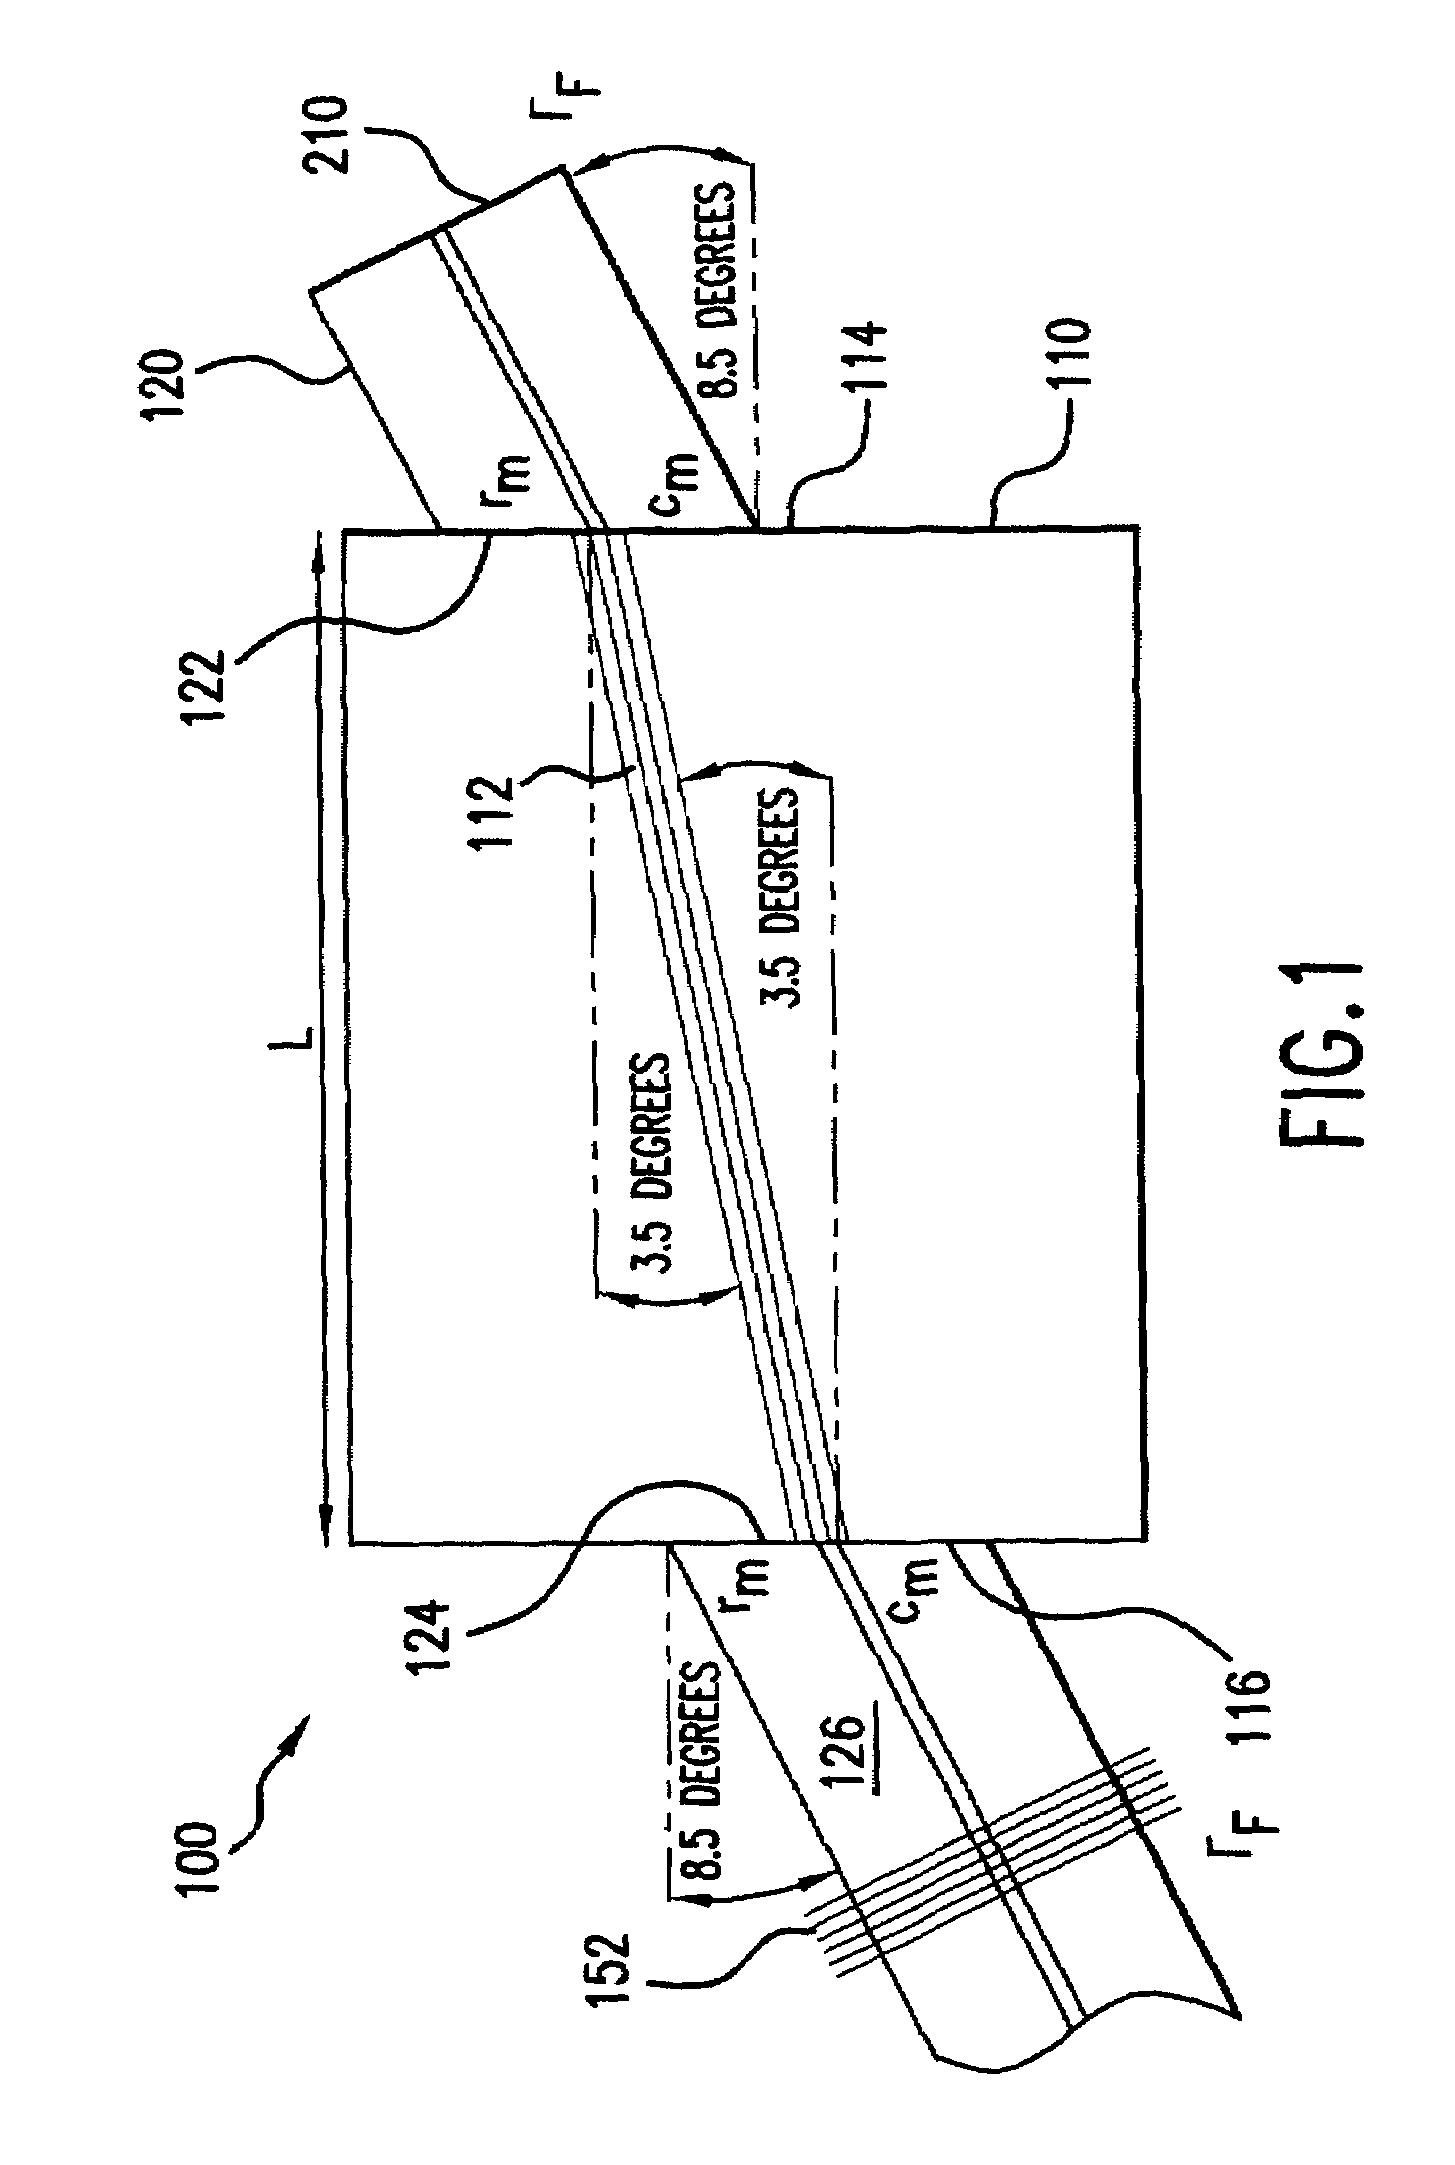 Large modal volume semiconductor laser system with spatial mode filter